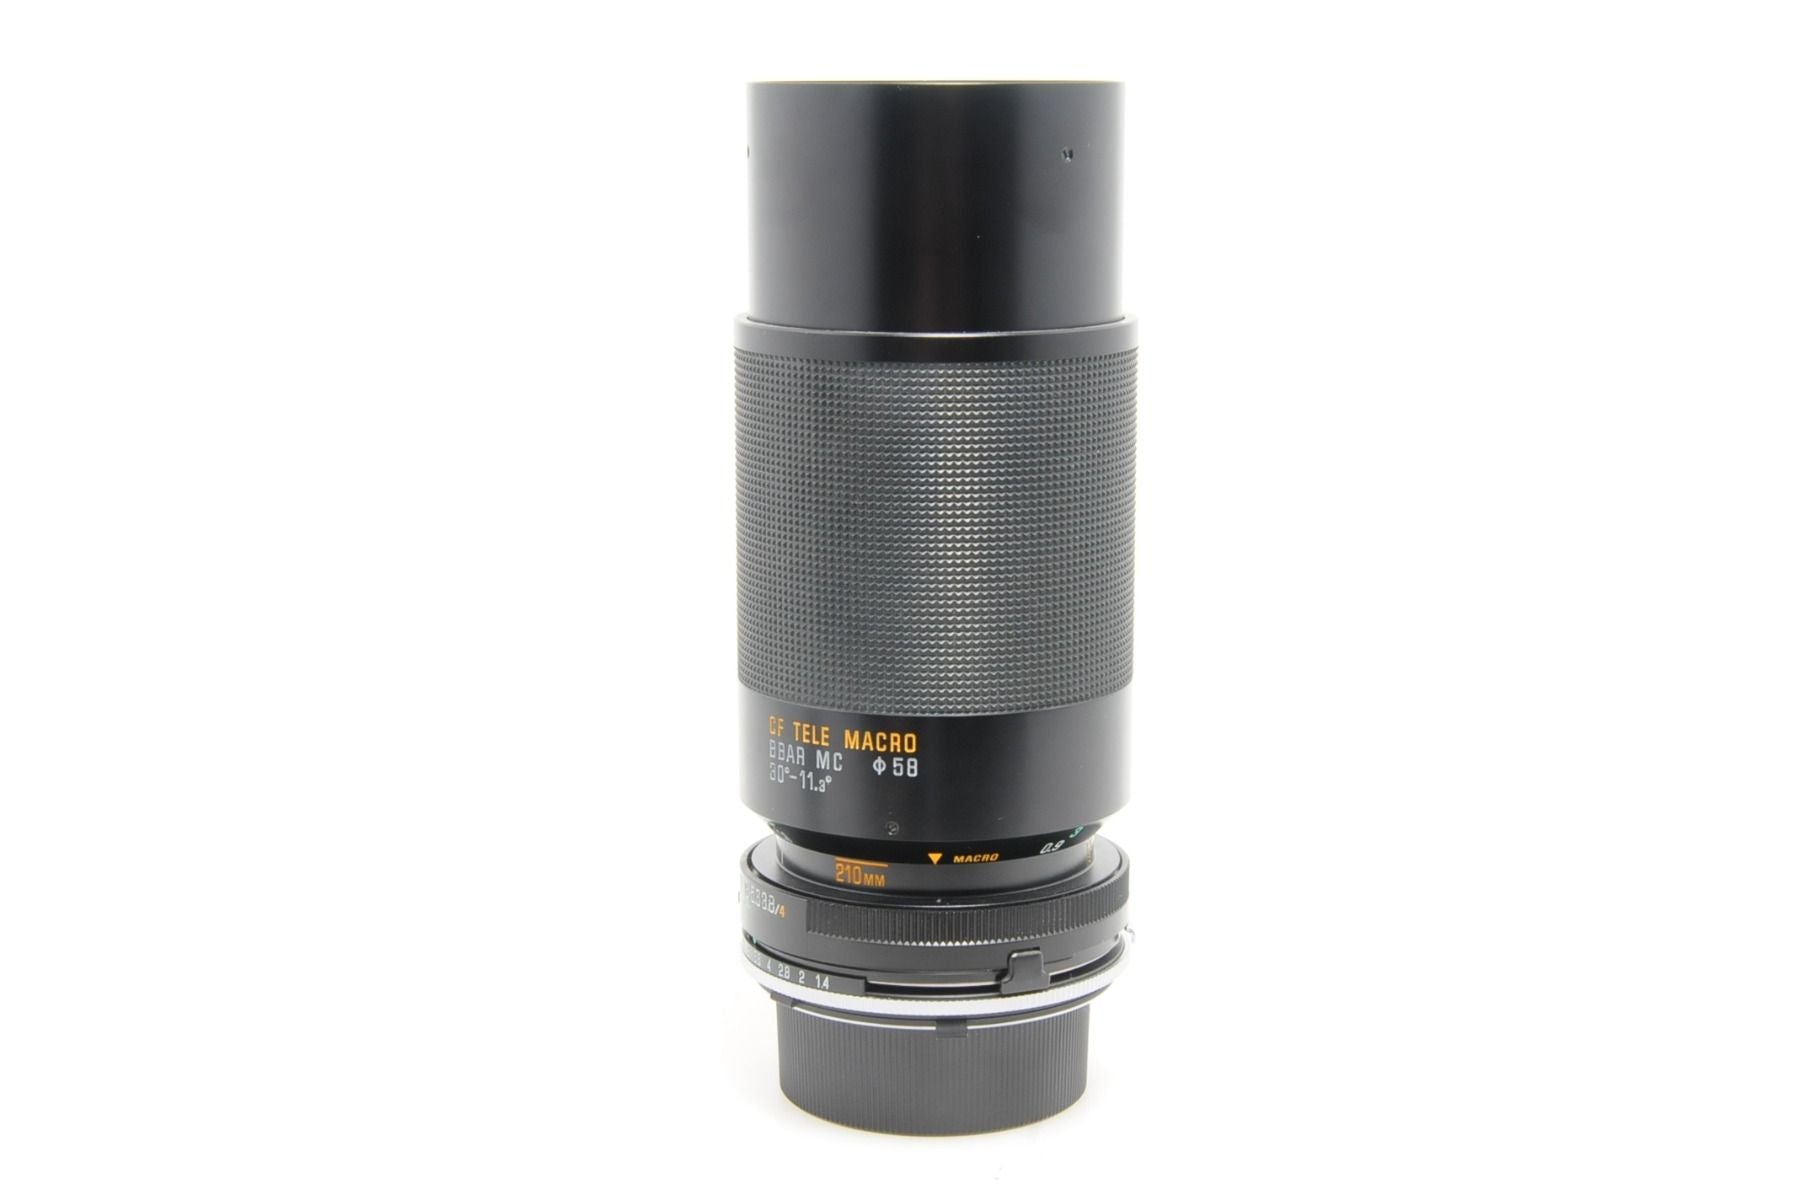 Used Tamron 80-210mm f3.8-4 Adaptall II lens with Minolta MD mount (Case, SH30500)